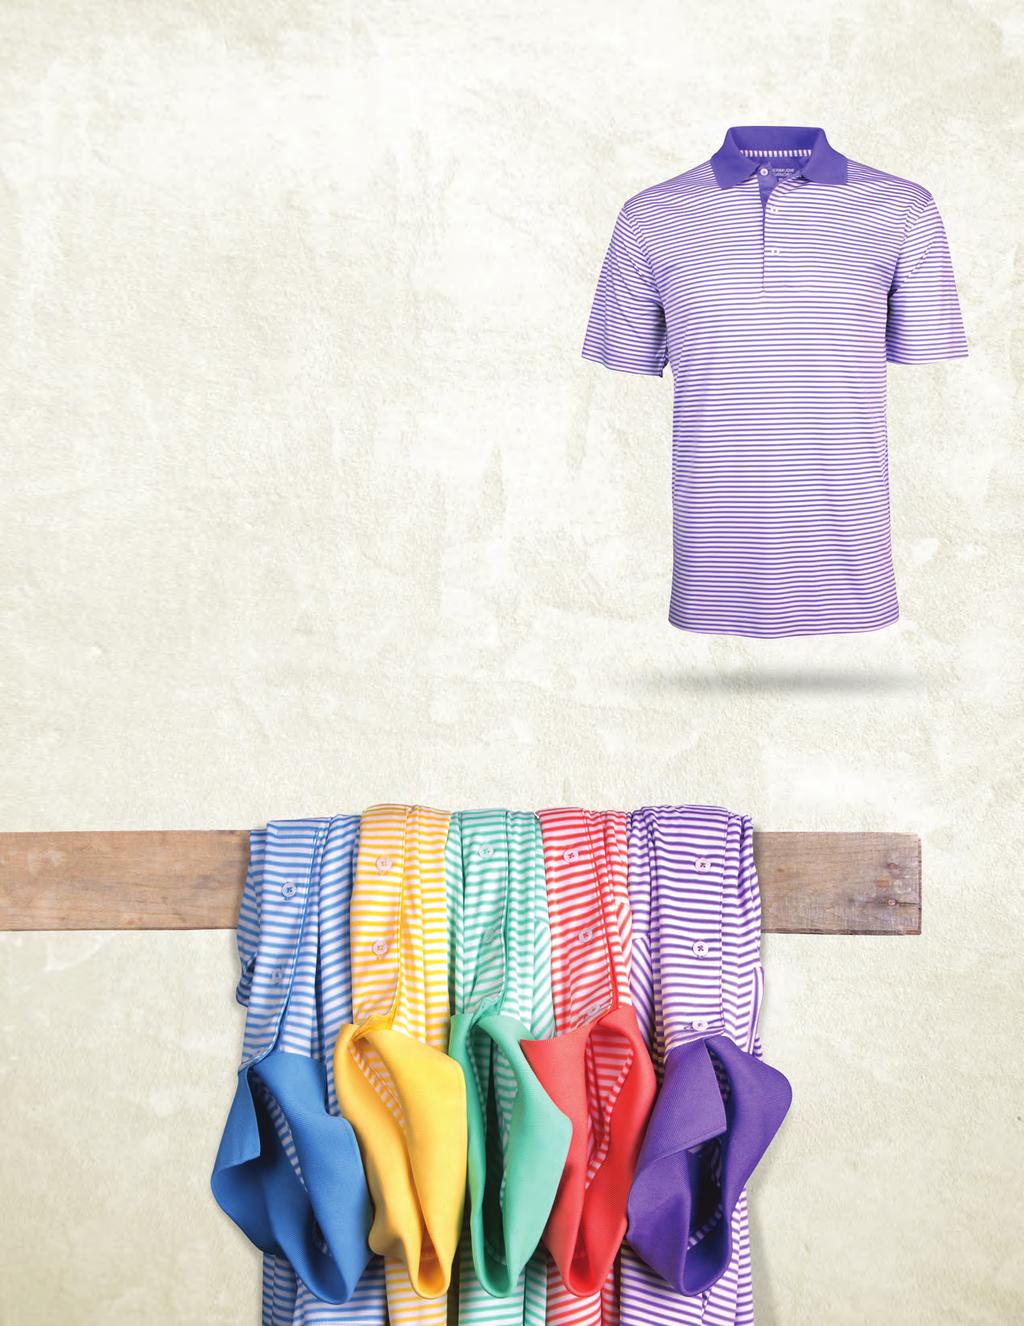 MEN S POLO MEN S POLO COOPER WOODLAND 722 552 Lake Blue, Sunflower, Surf Green, Coral Reef, Crimson, Black, Bue Sky, Mineral Green Soft Purple Mens: S 4XL 92% Polyester 8% Spandex G2 Tech Performance